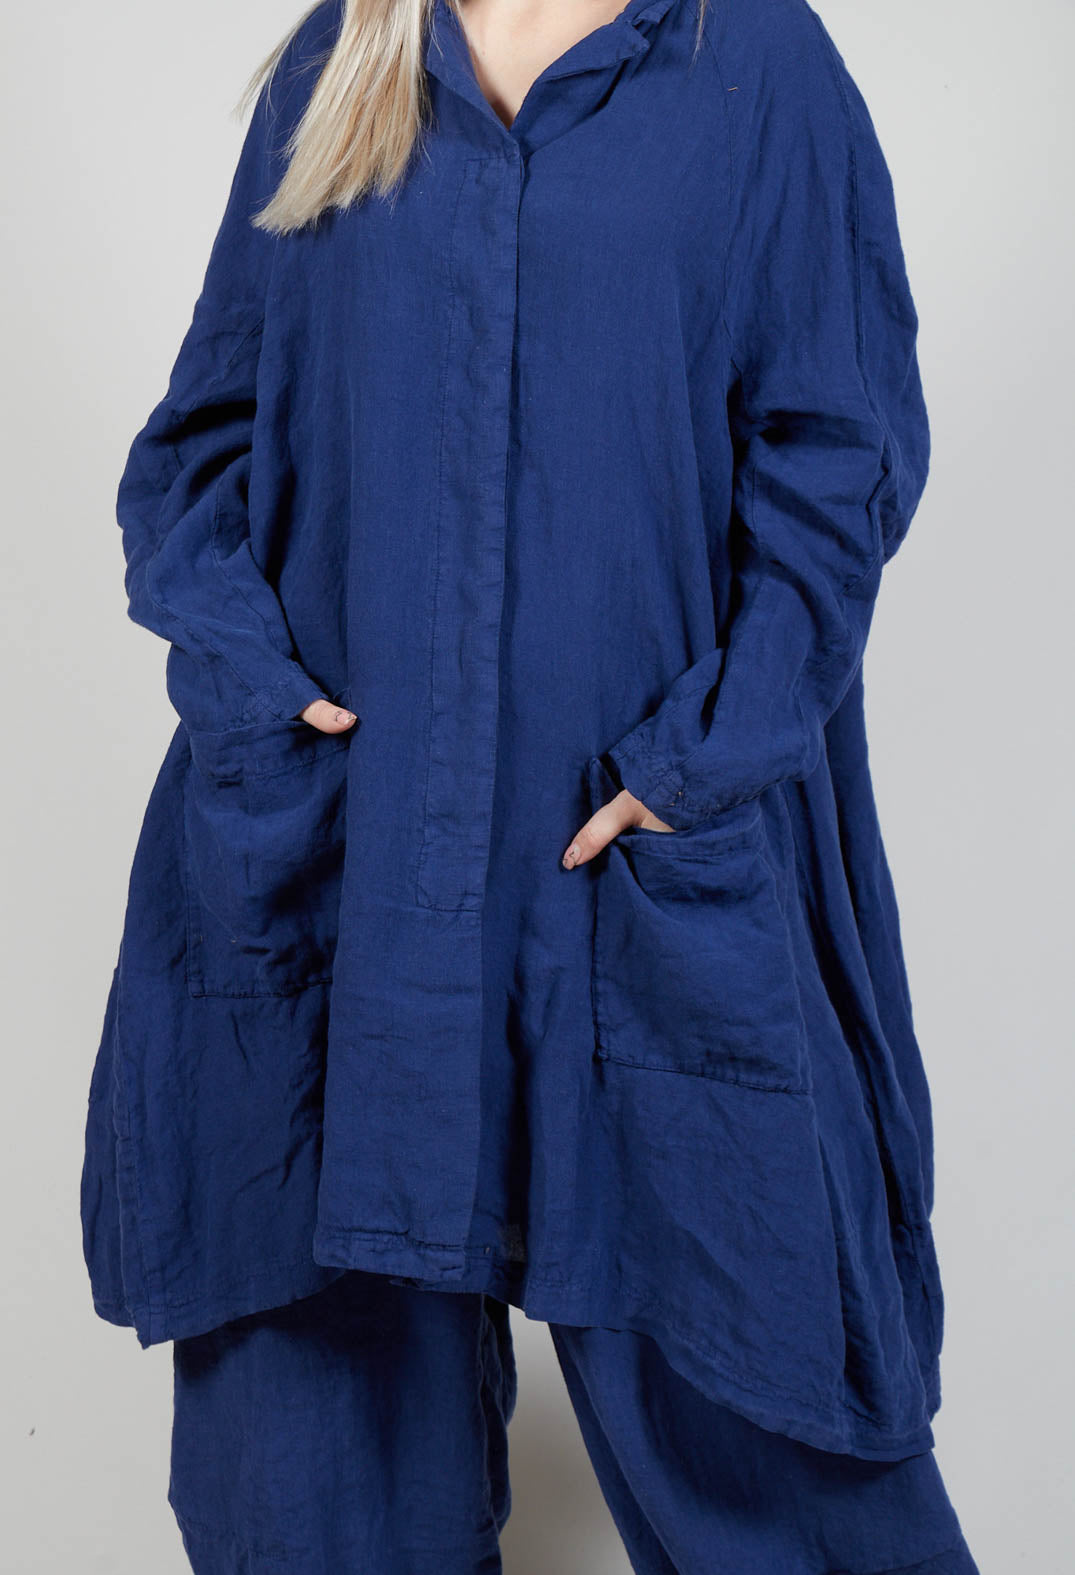 Relaxed Fit Linen Coat in Azur